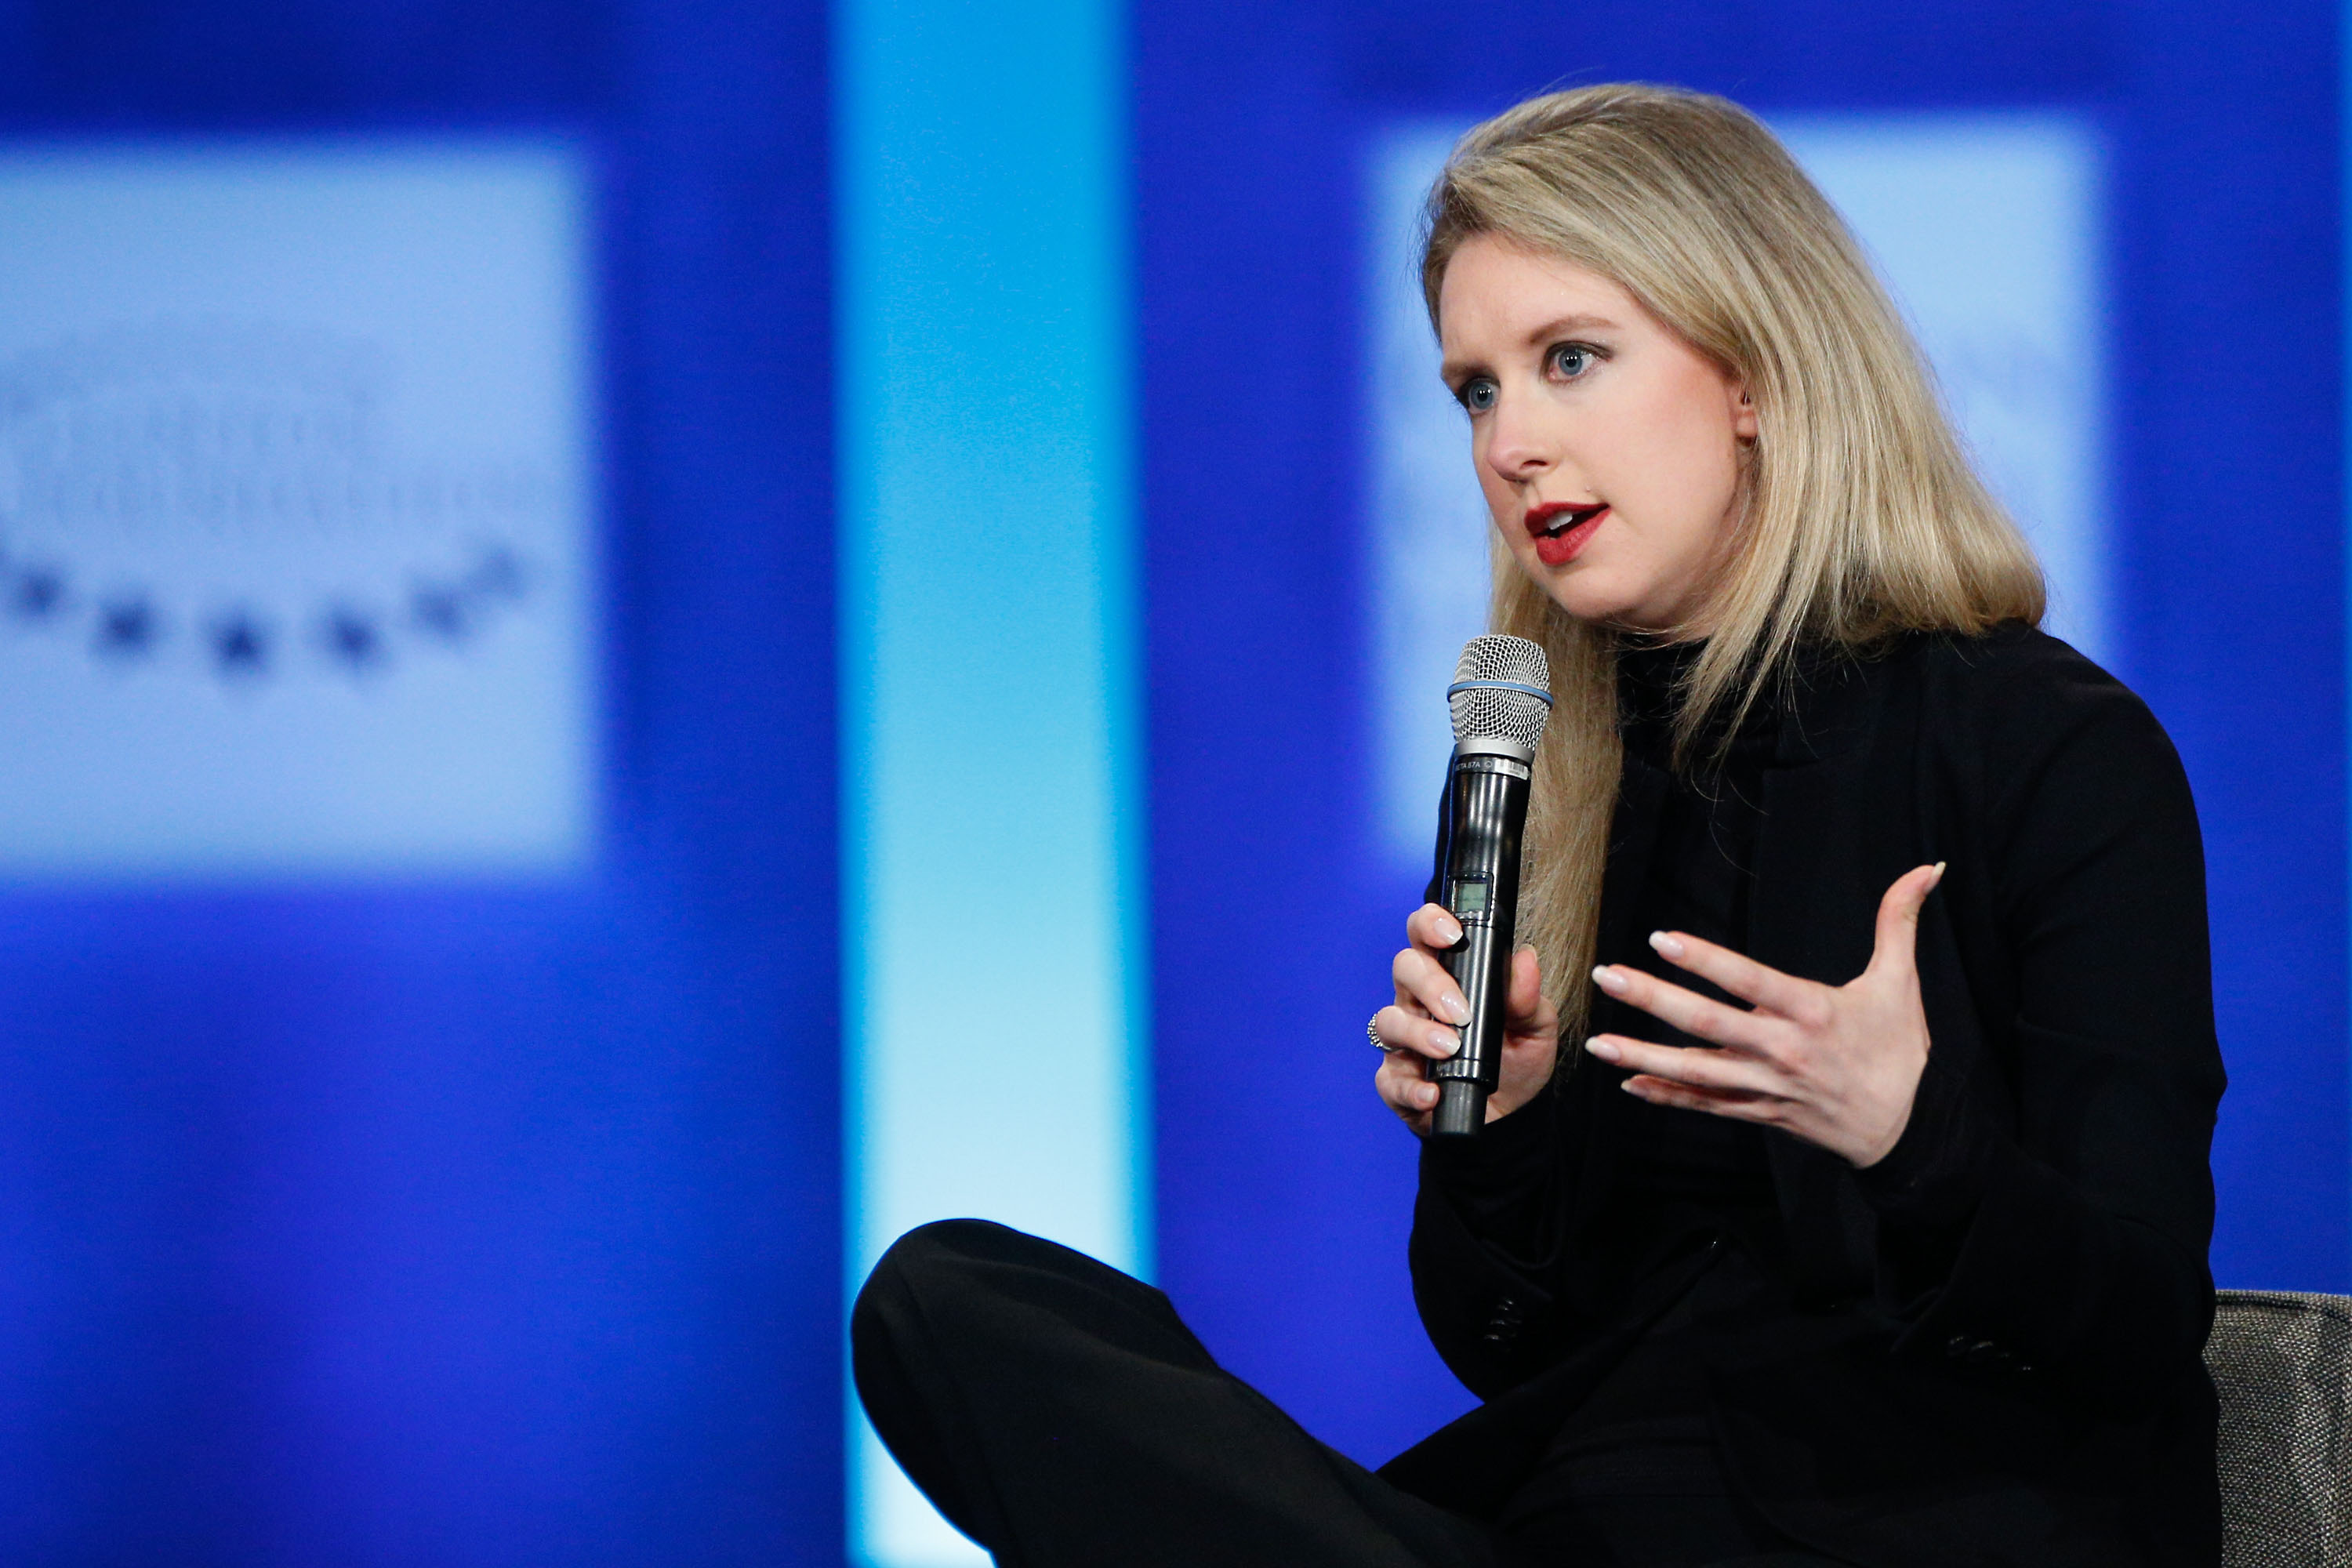 Elizabeth Holmes speaks on stage during the closing session of the Clinton Global Initiative 2015 in New York City on Sept. 29, 2015. (JP Yim—Getty Images)